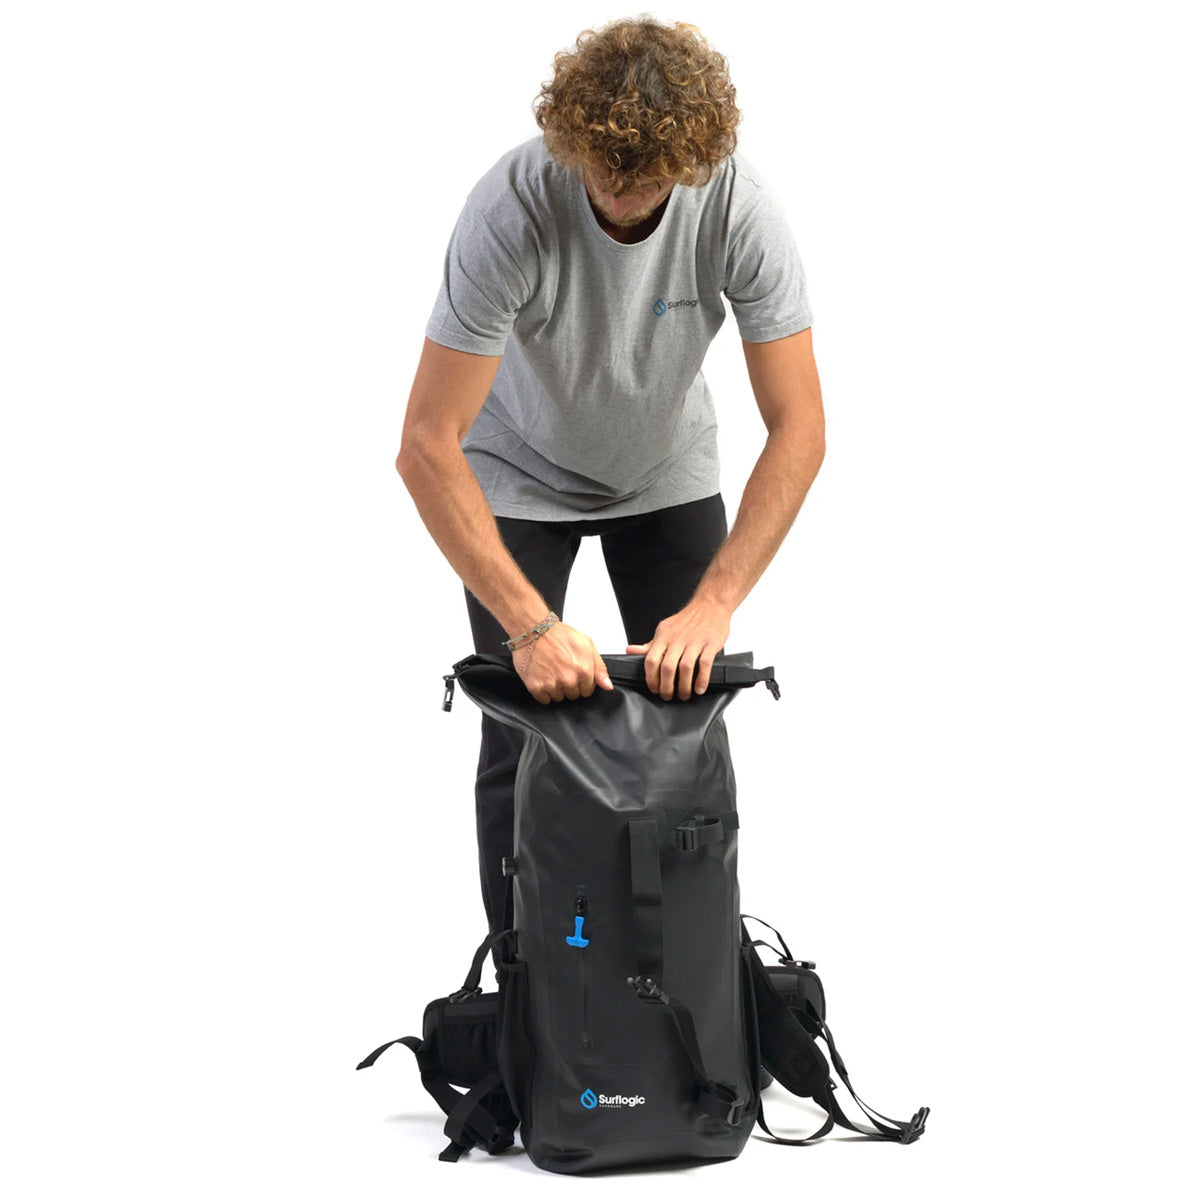 Surflogic Expedition Dry Waterproof Backpack - SUP